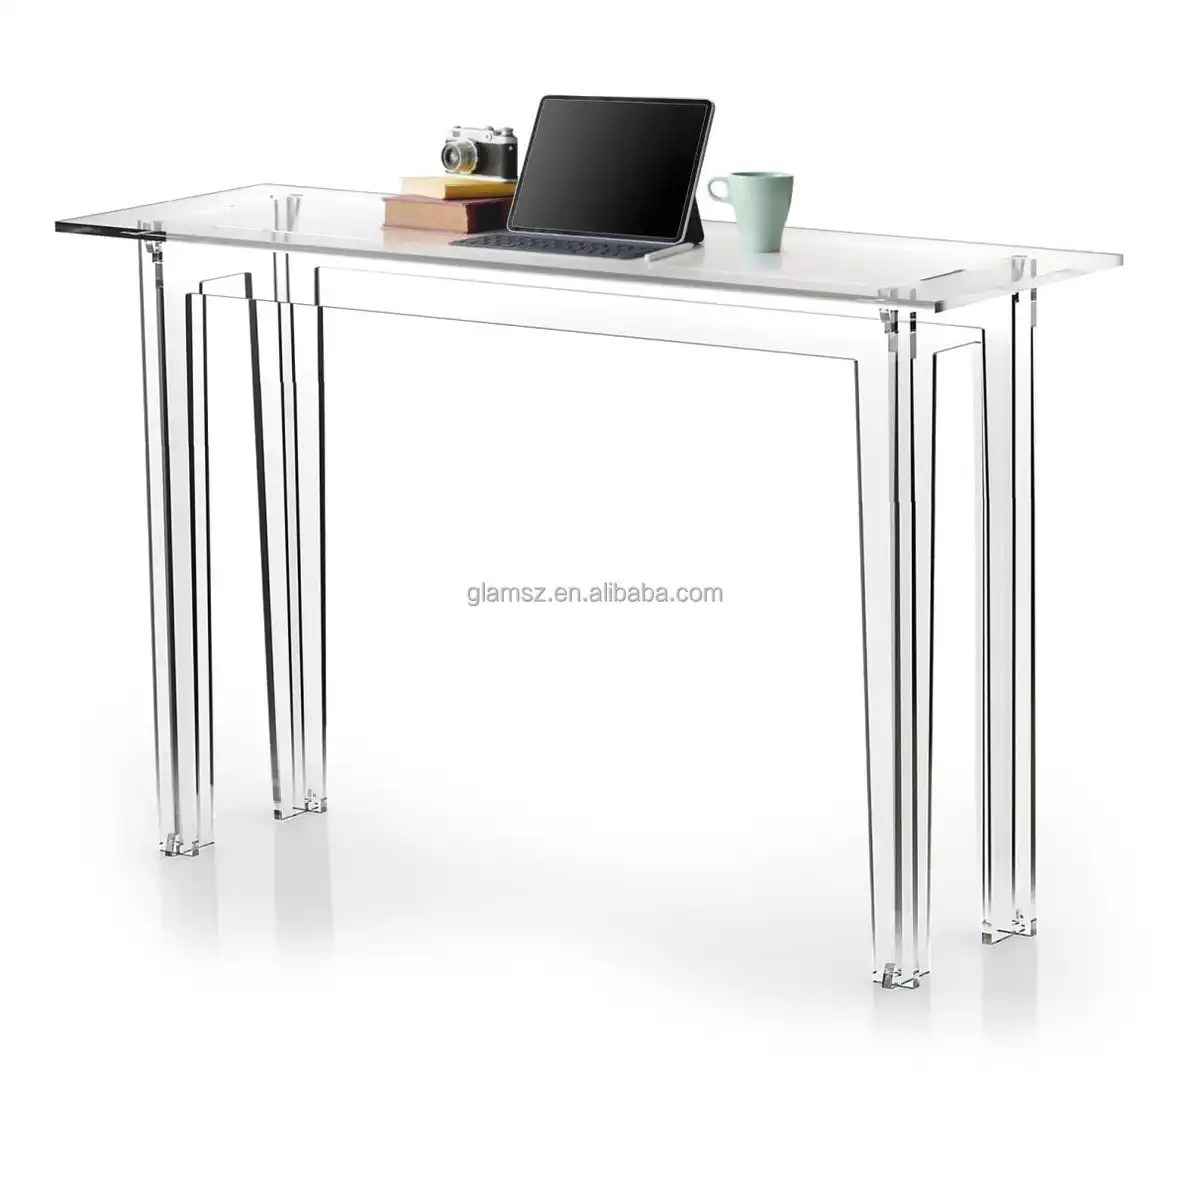 wholesale custom furniture Coffee tempered dining Modern acrylic design side table